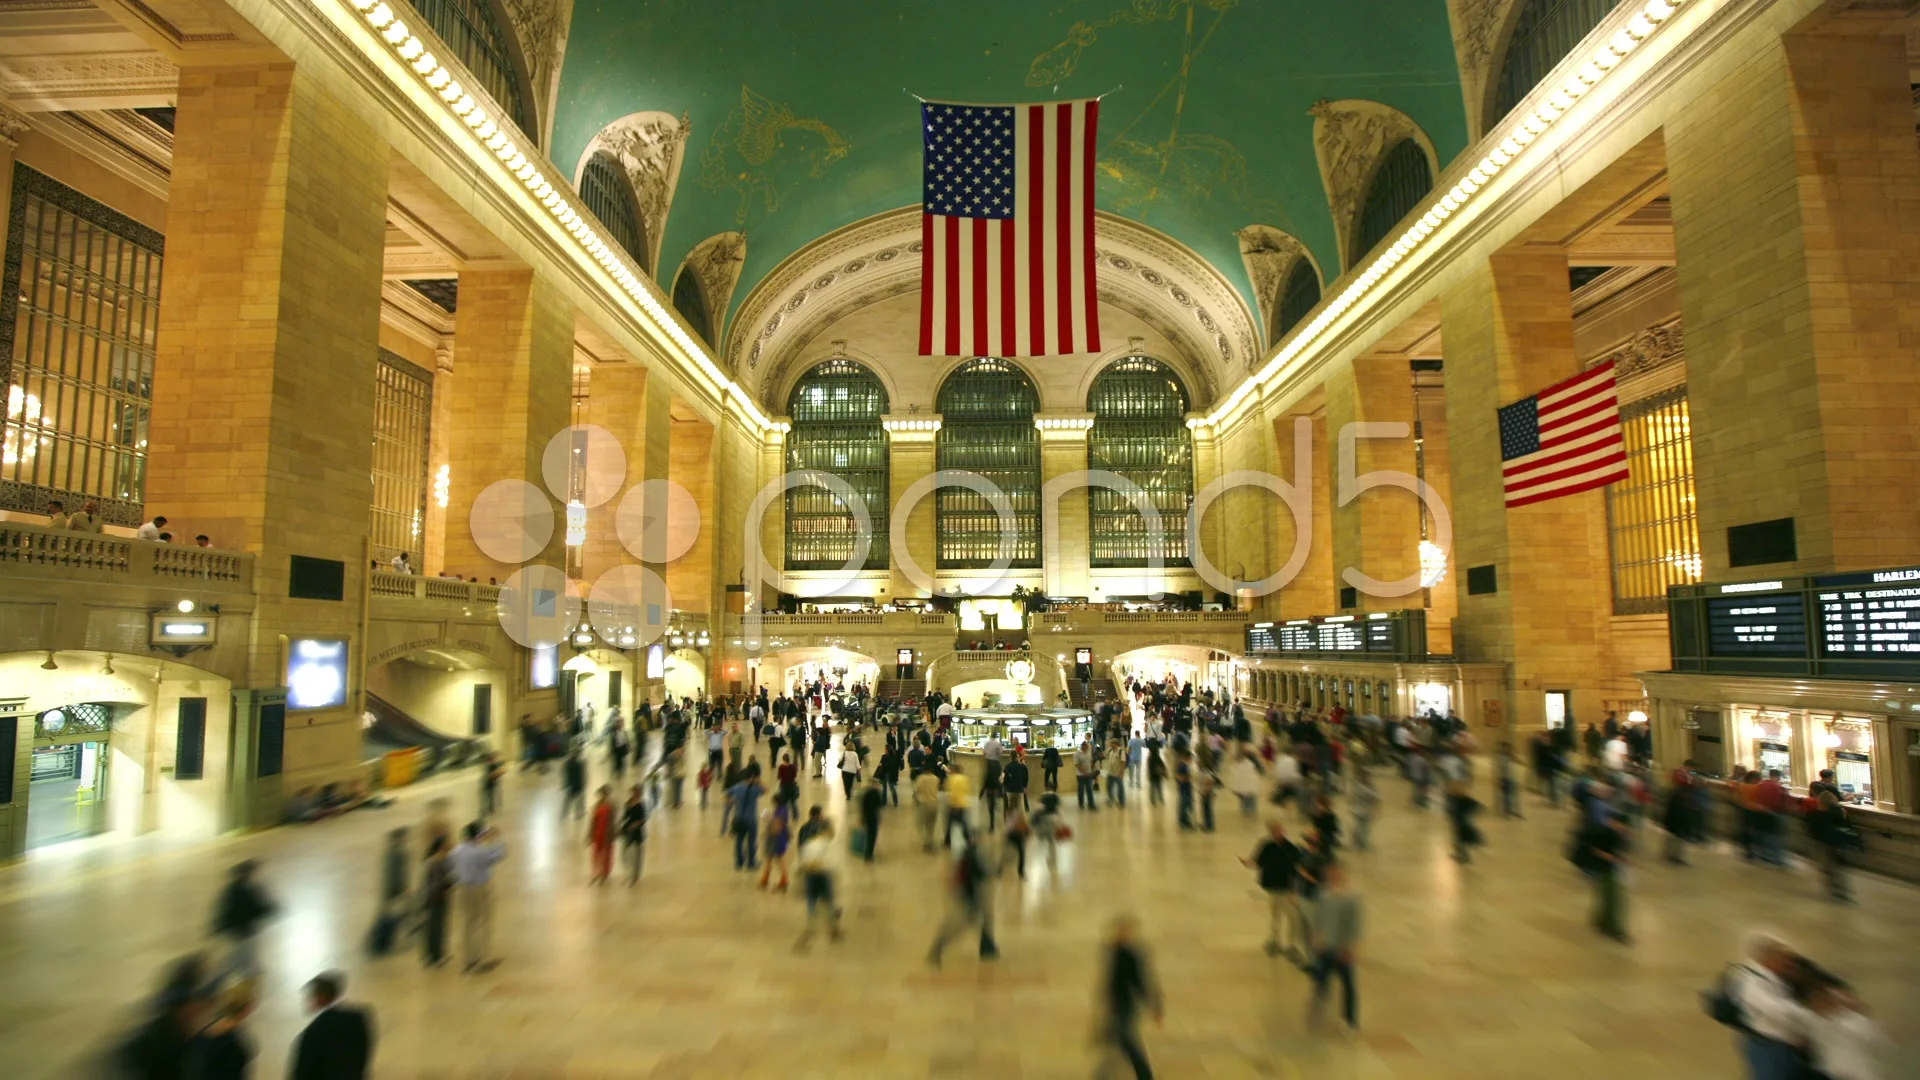 Grand central terminal 1080P 2K 4K 5K HD wallpapers free download   Wallpaper Flare